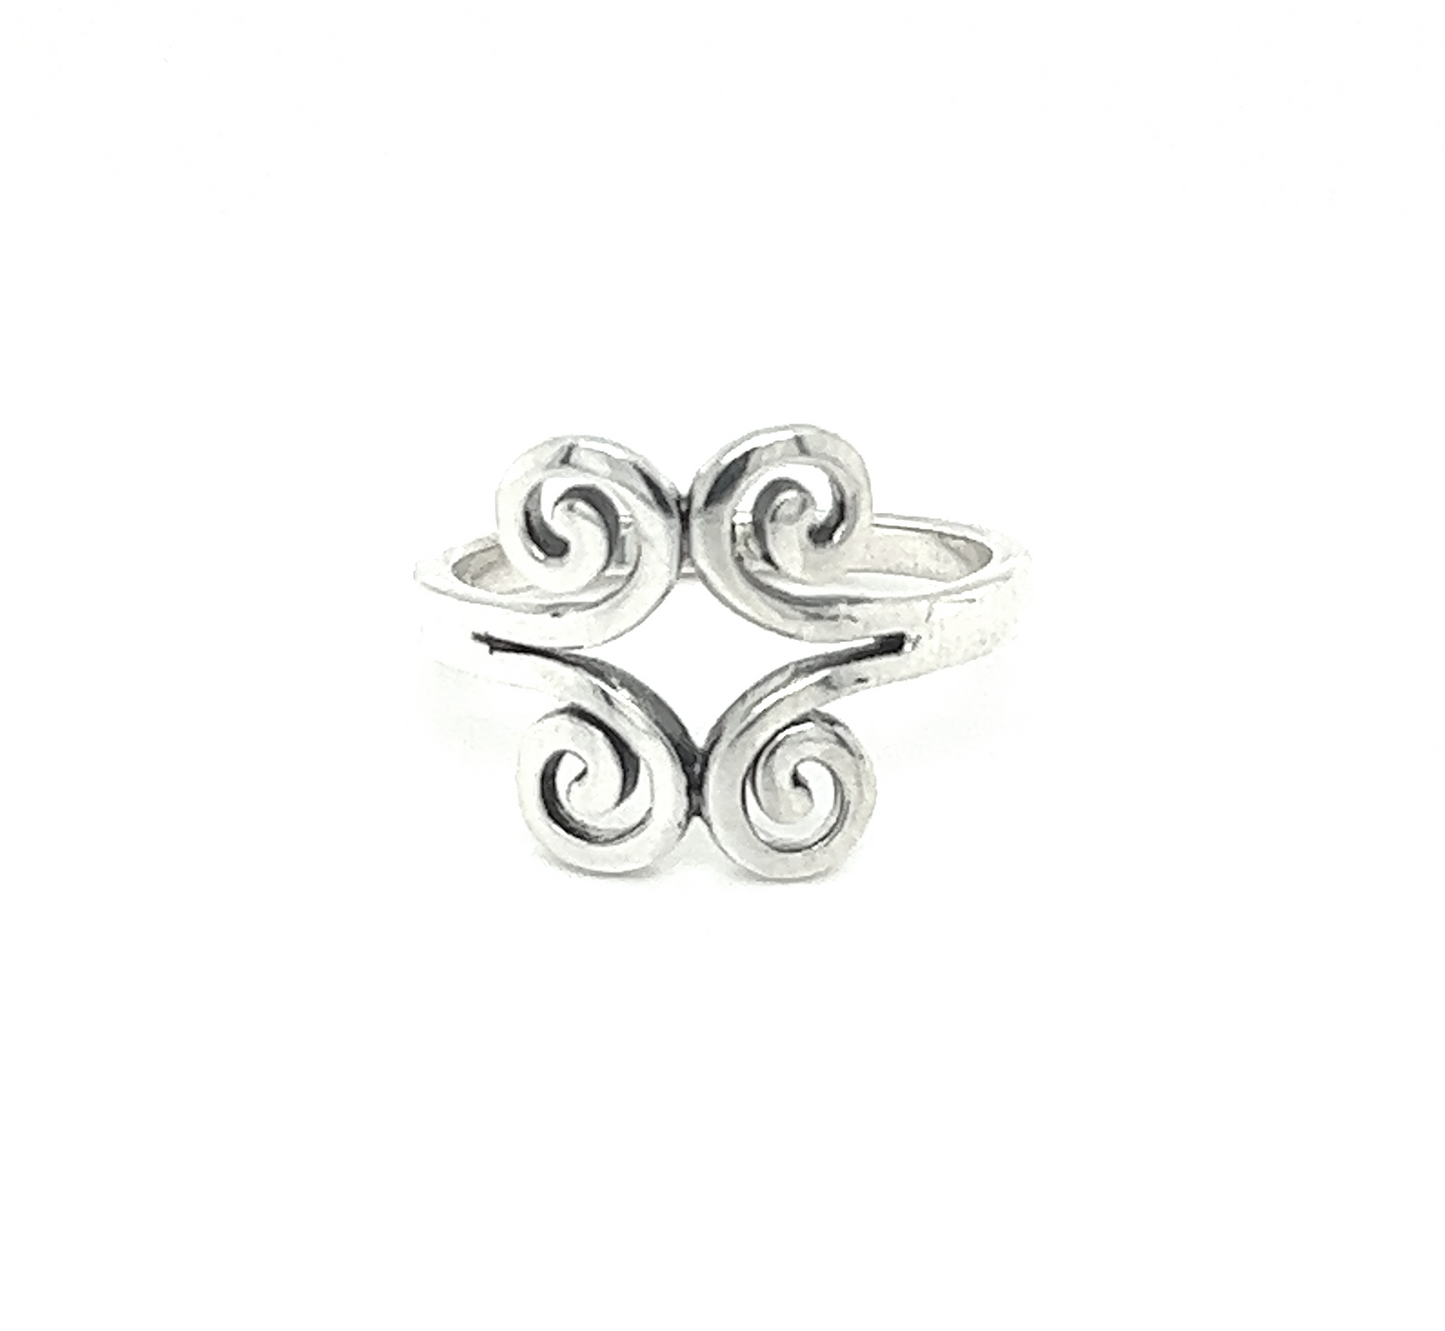 A Popular Silver Swirl Ring with a silver swirl design.